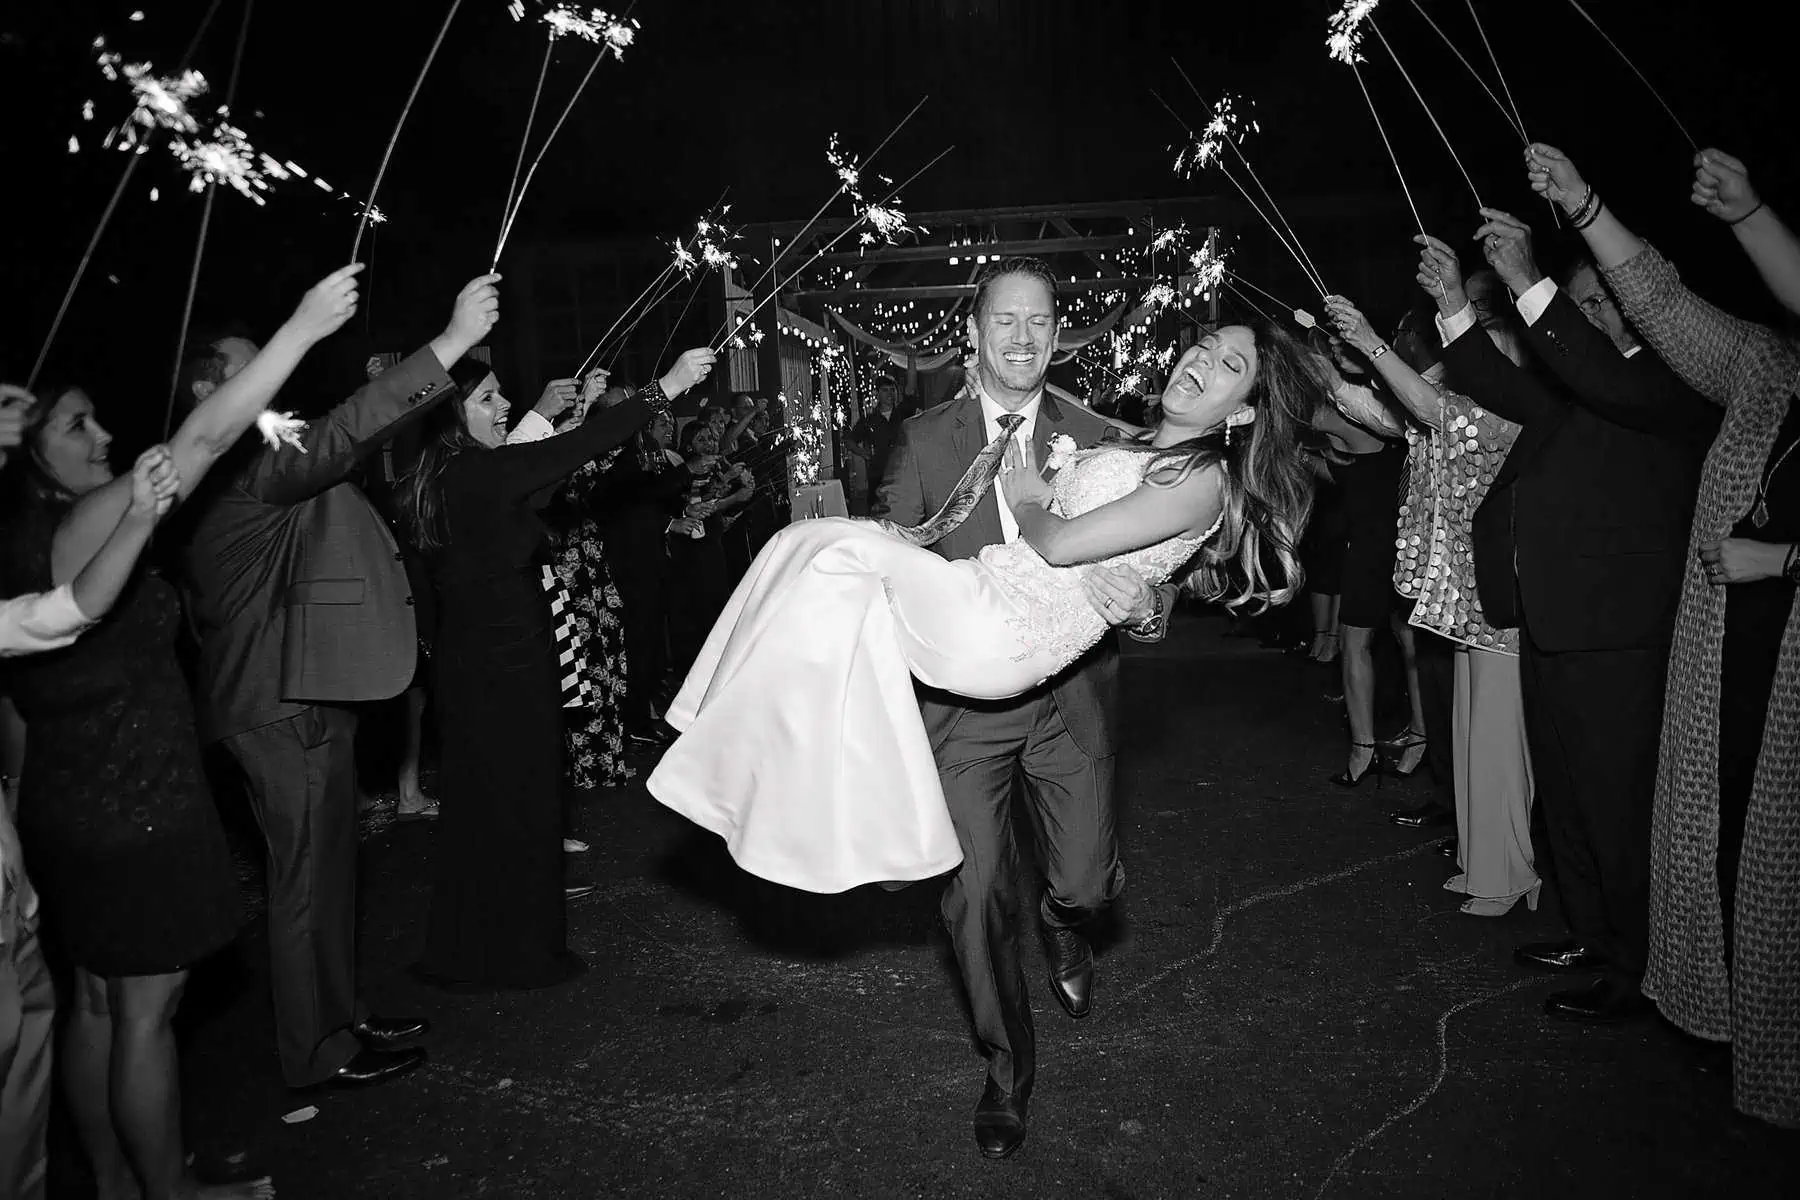 A bride and groom holding sparklers in the air.